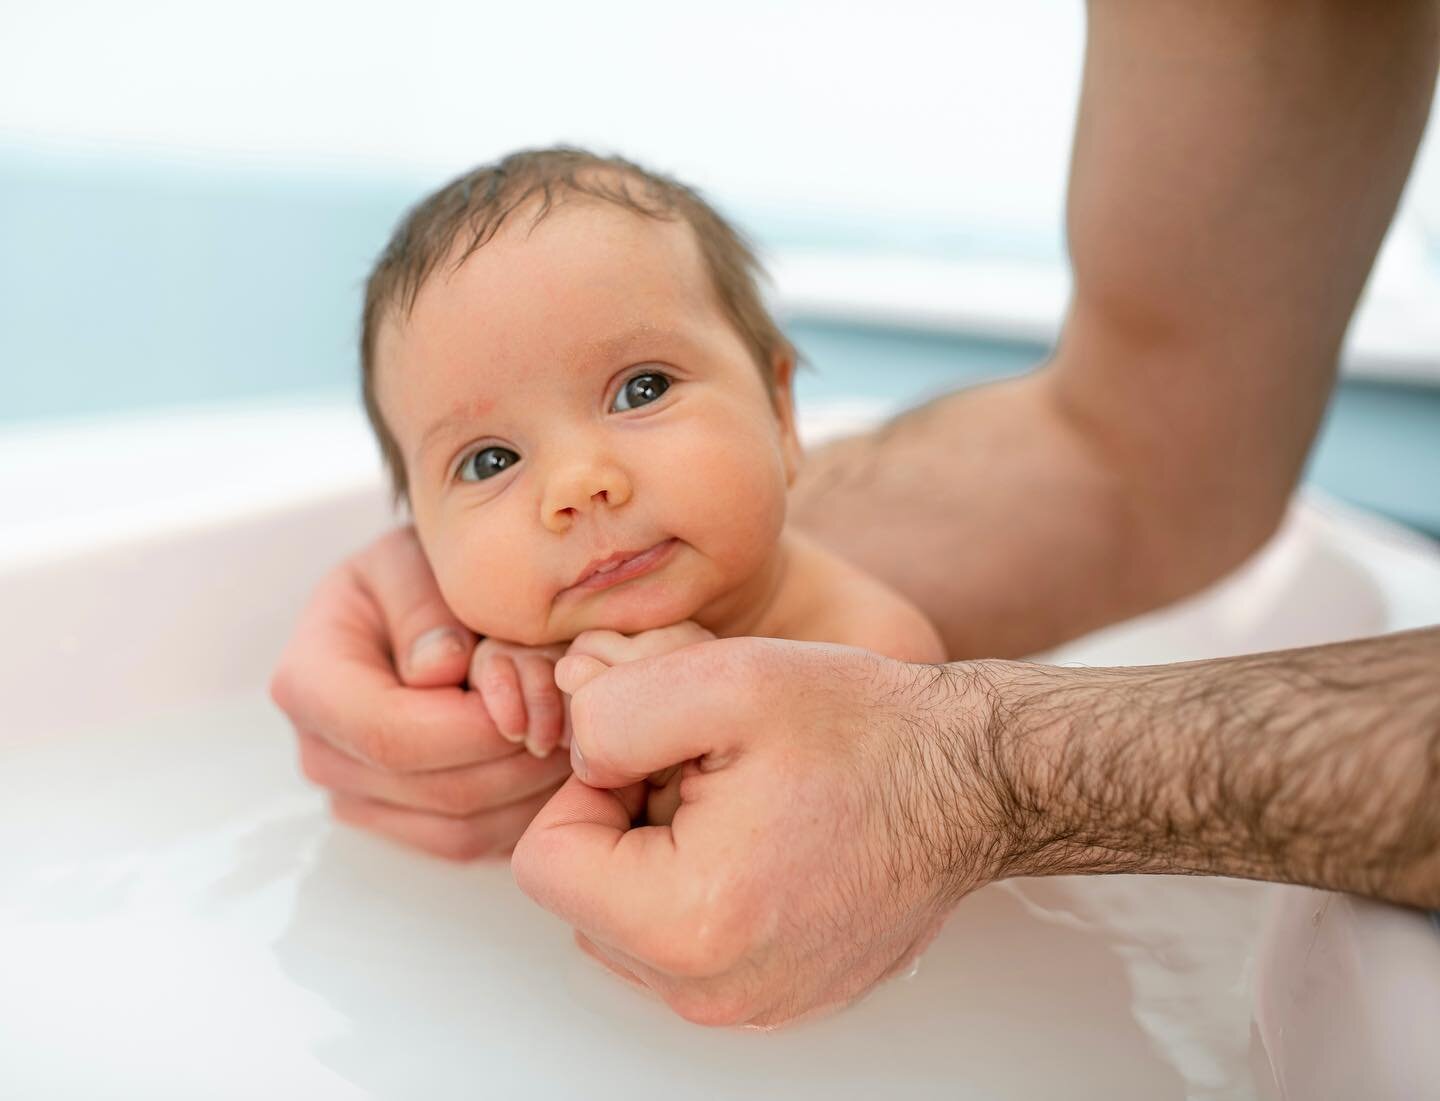 🛀🏻 One common myth is that newborn babies need be bathed immediately after birth and every day after, however bathing your newborn baby daily is not recommended. 
&nbsp;
Newborn babies are covered in vernix, the thick white substance from birth, fi